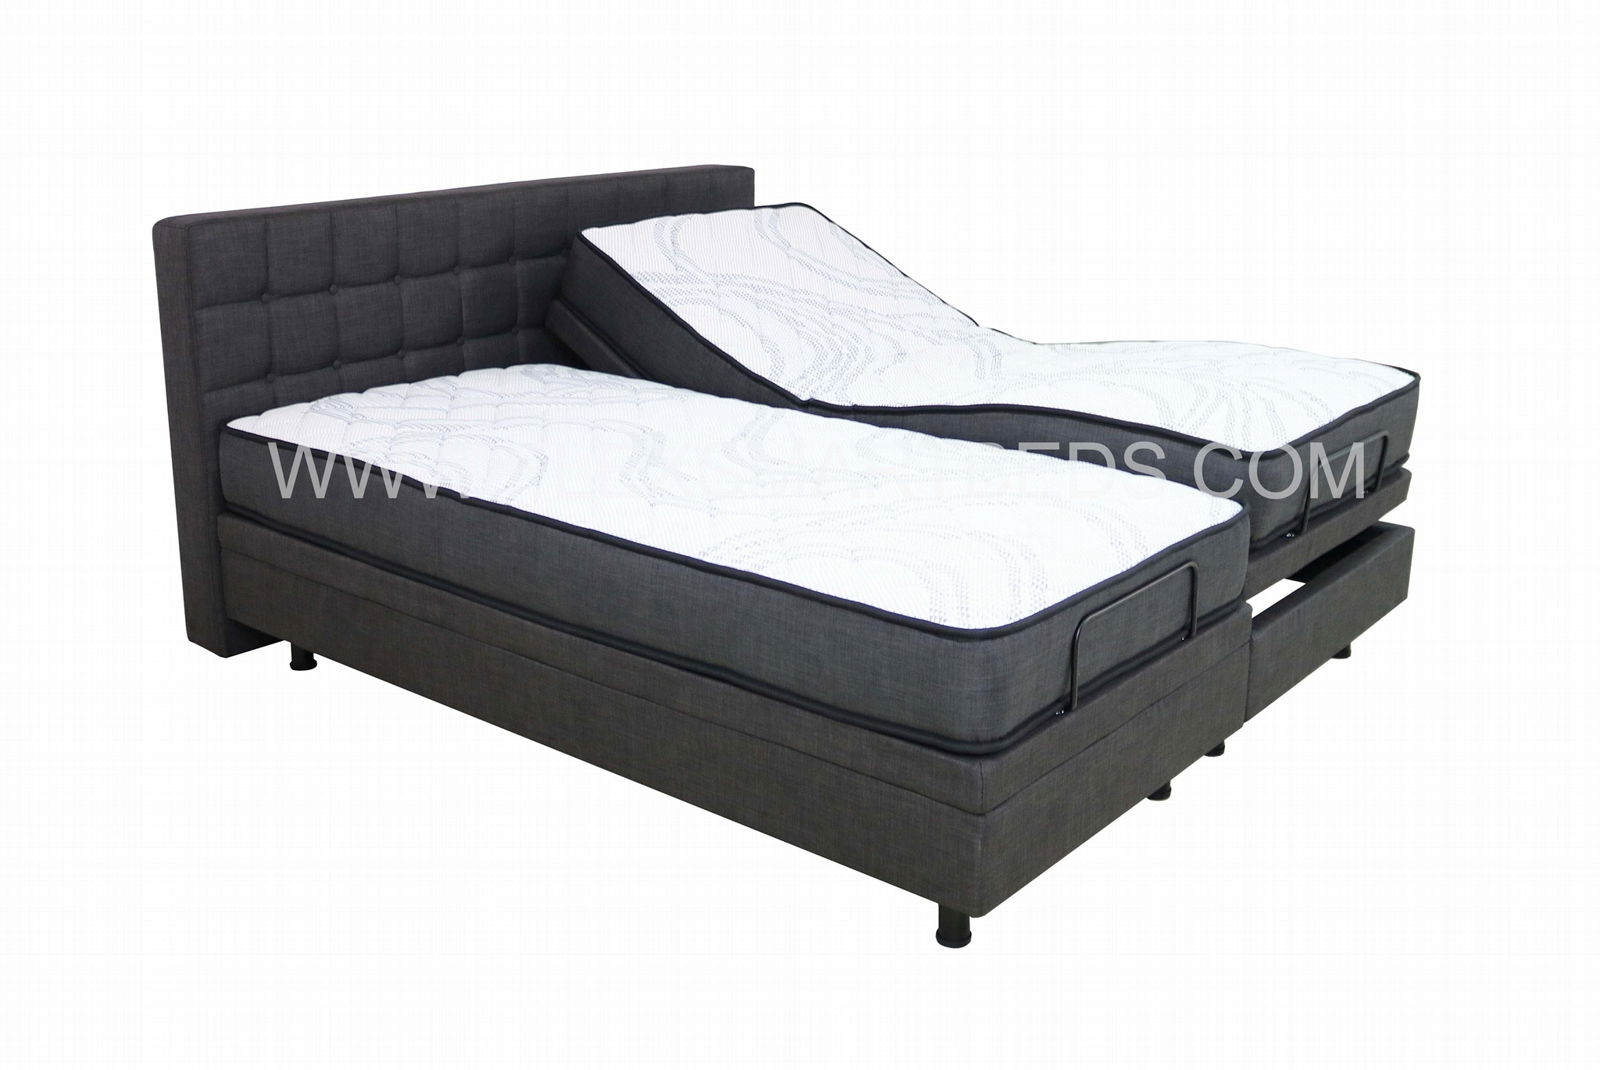 Adjustable Beds for Home Use 5